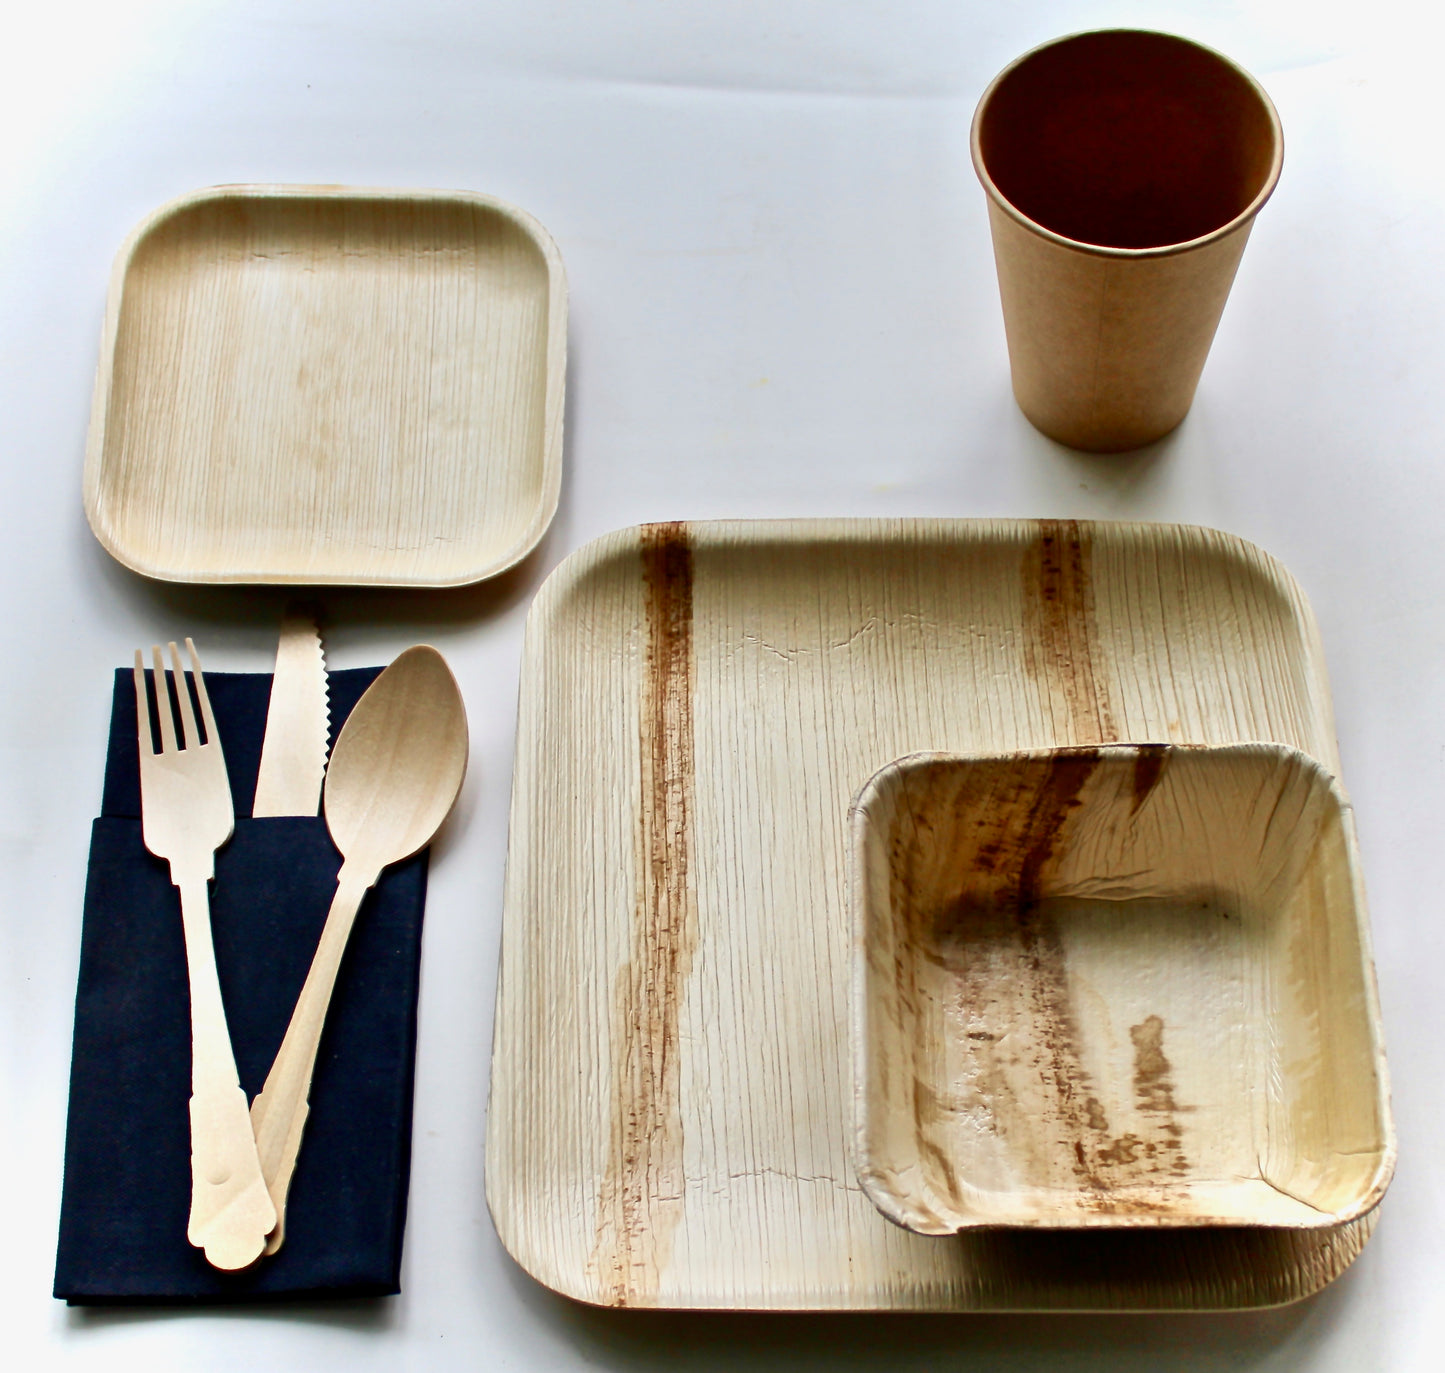 palm leaf plates 10 pice Square 9.5" -10 Pic 6" Square Bowl - 10 Pic square 6" - 10 Pic coup - 30 pic utensils - 10 pic 6"x9" Triangle - 10 pic 5" Bowl    and    30  pic cutler - 50 pic napkin